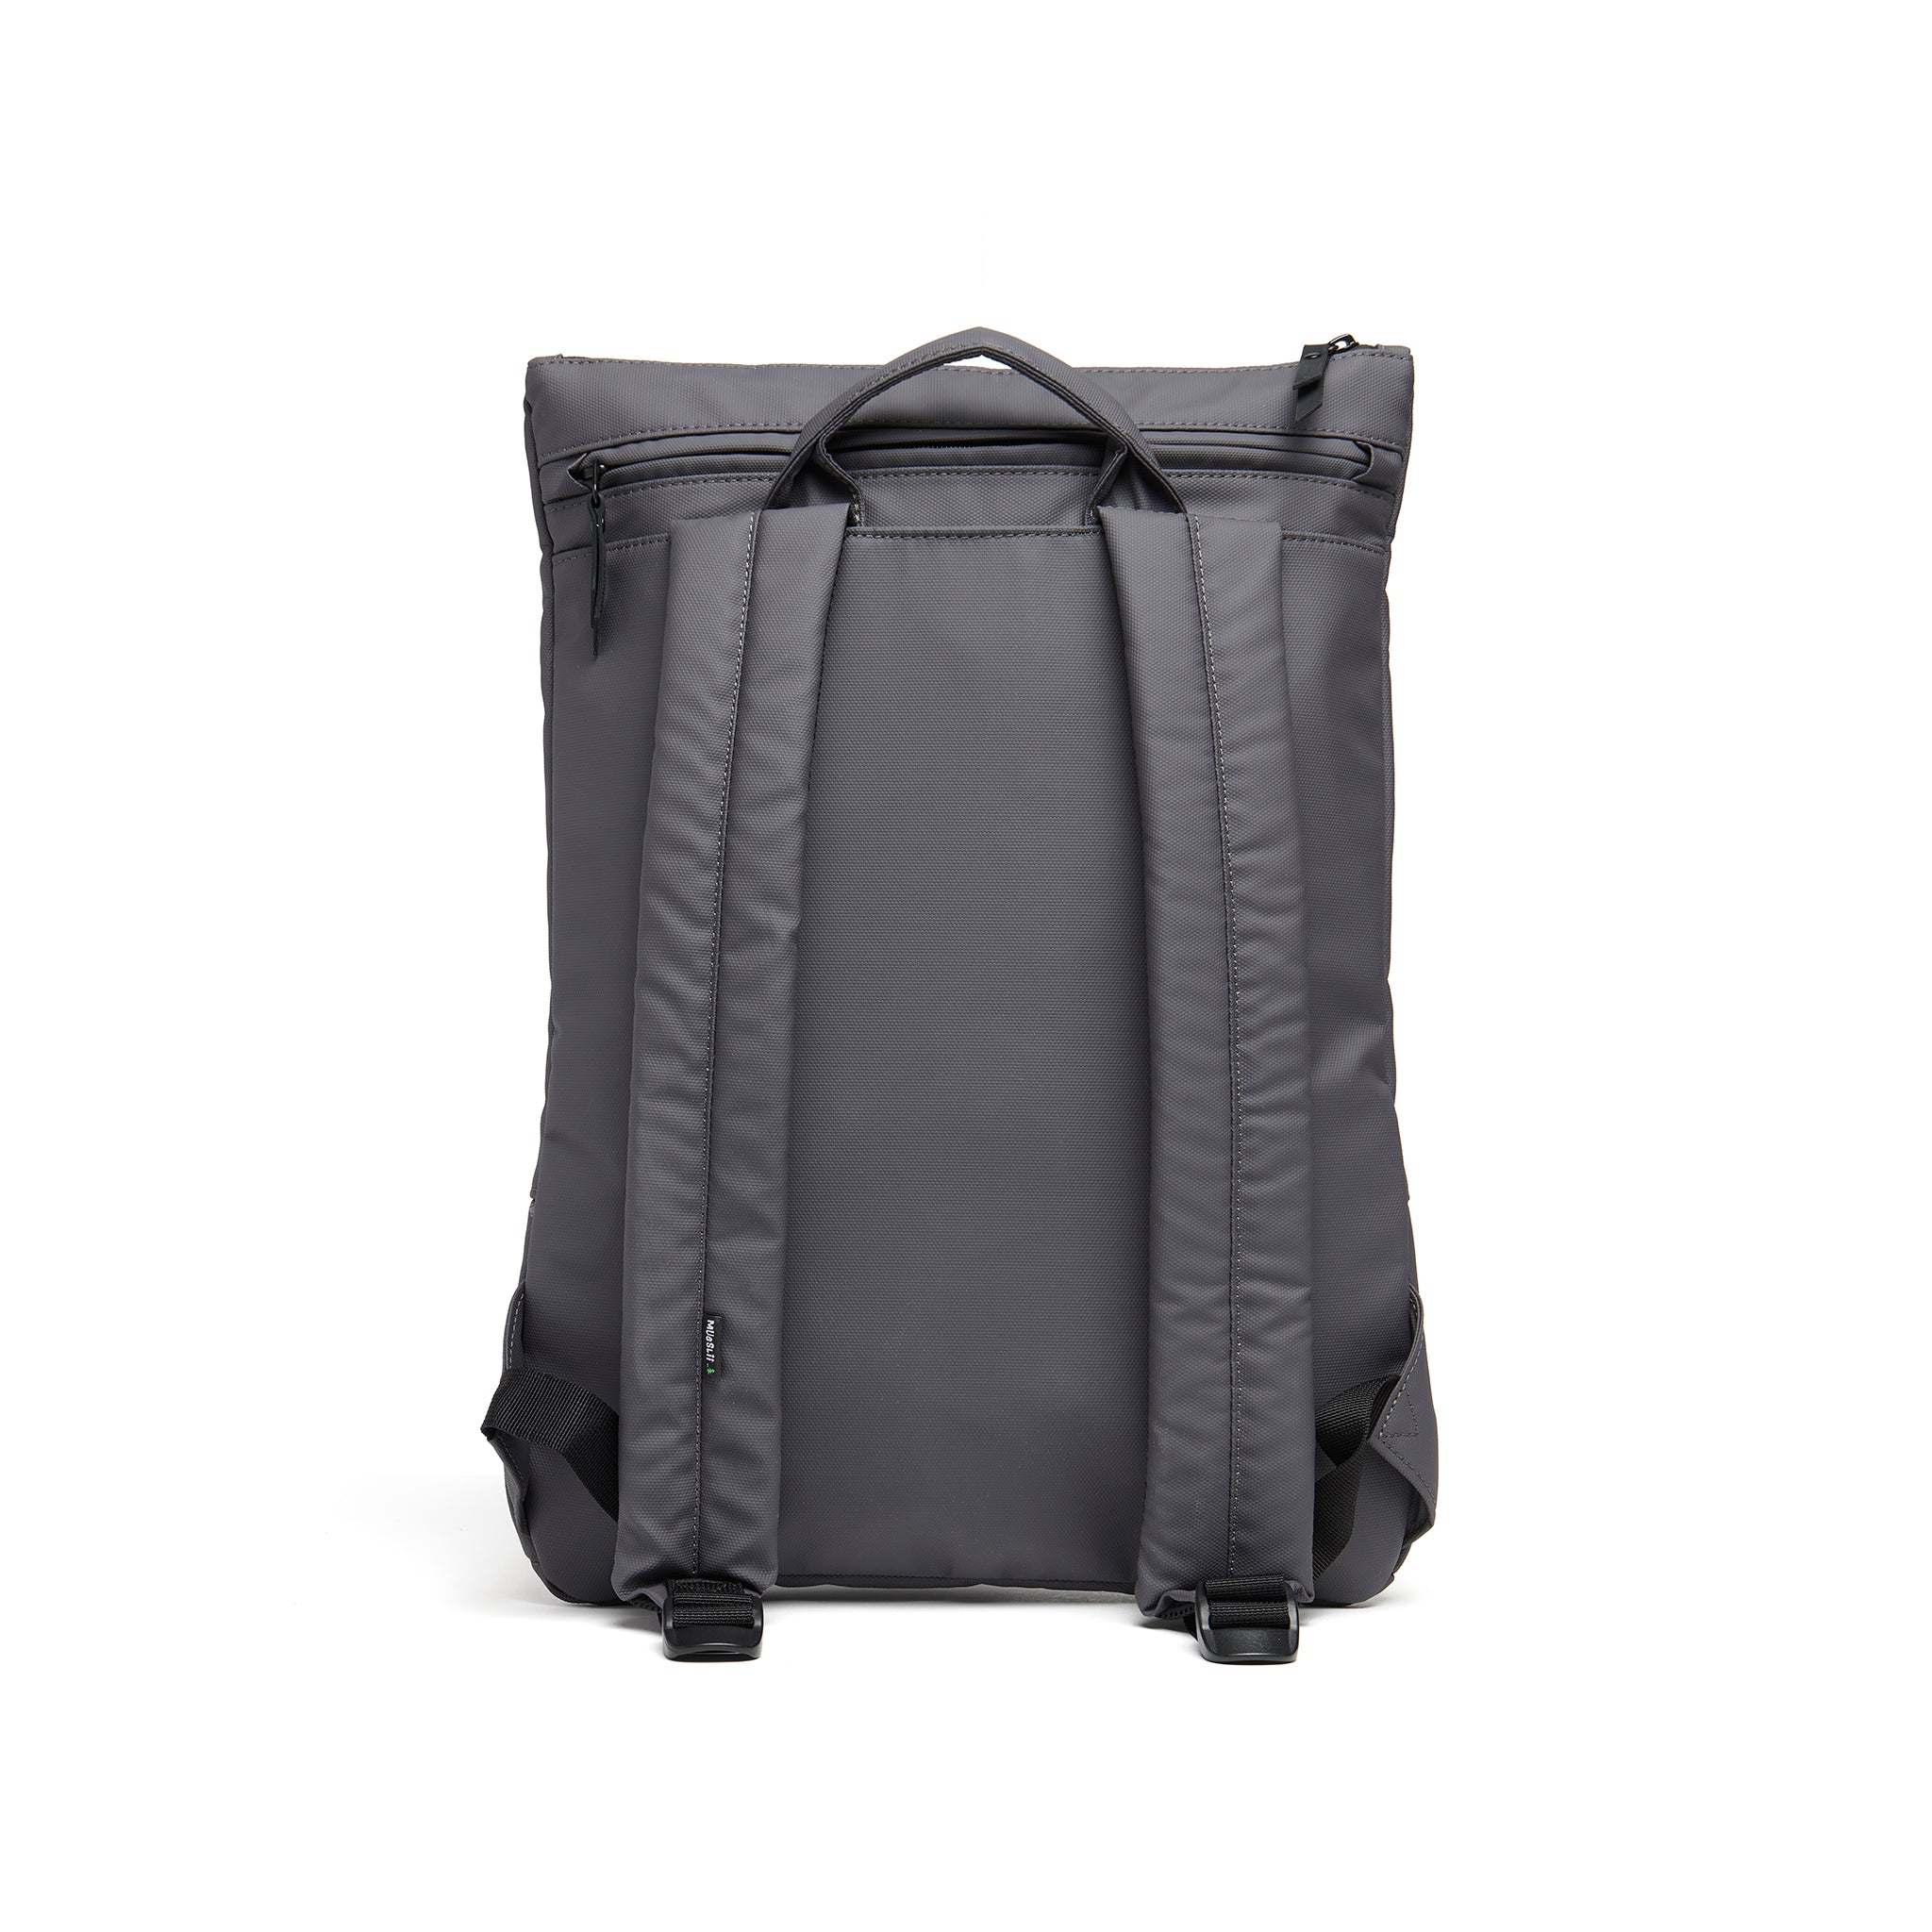 Mueslii light pack,  made of PU coated waterproof nylon, color grey, back view.